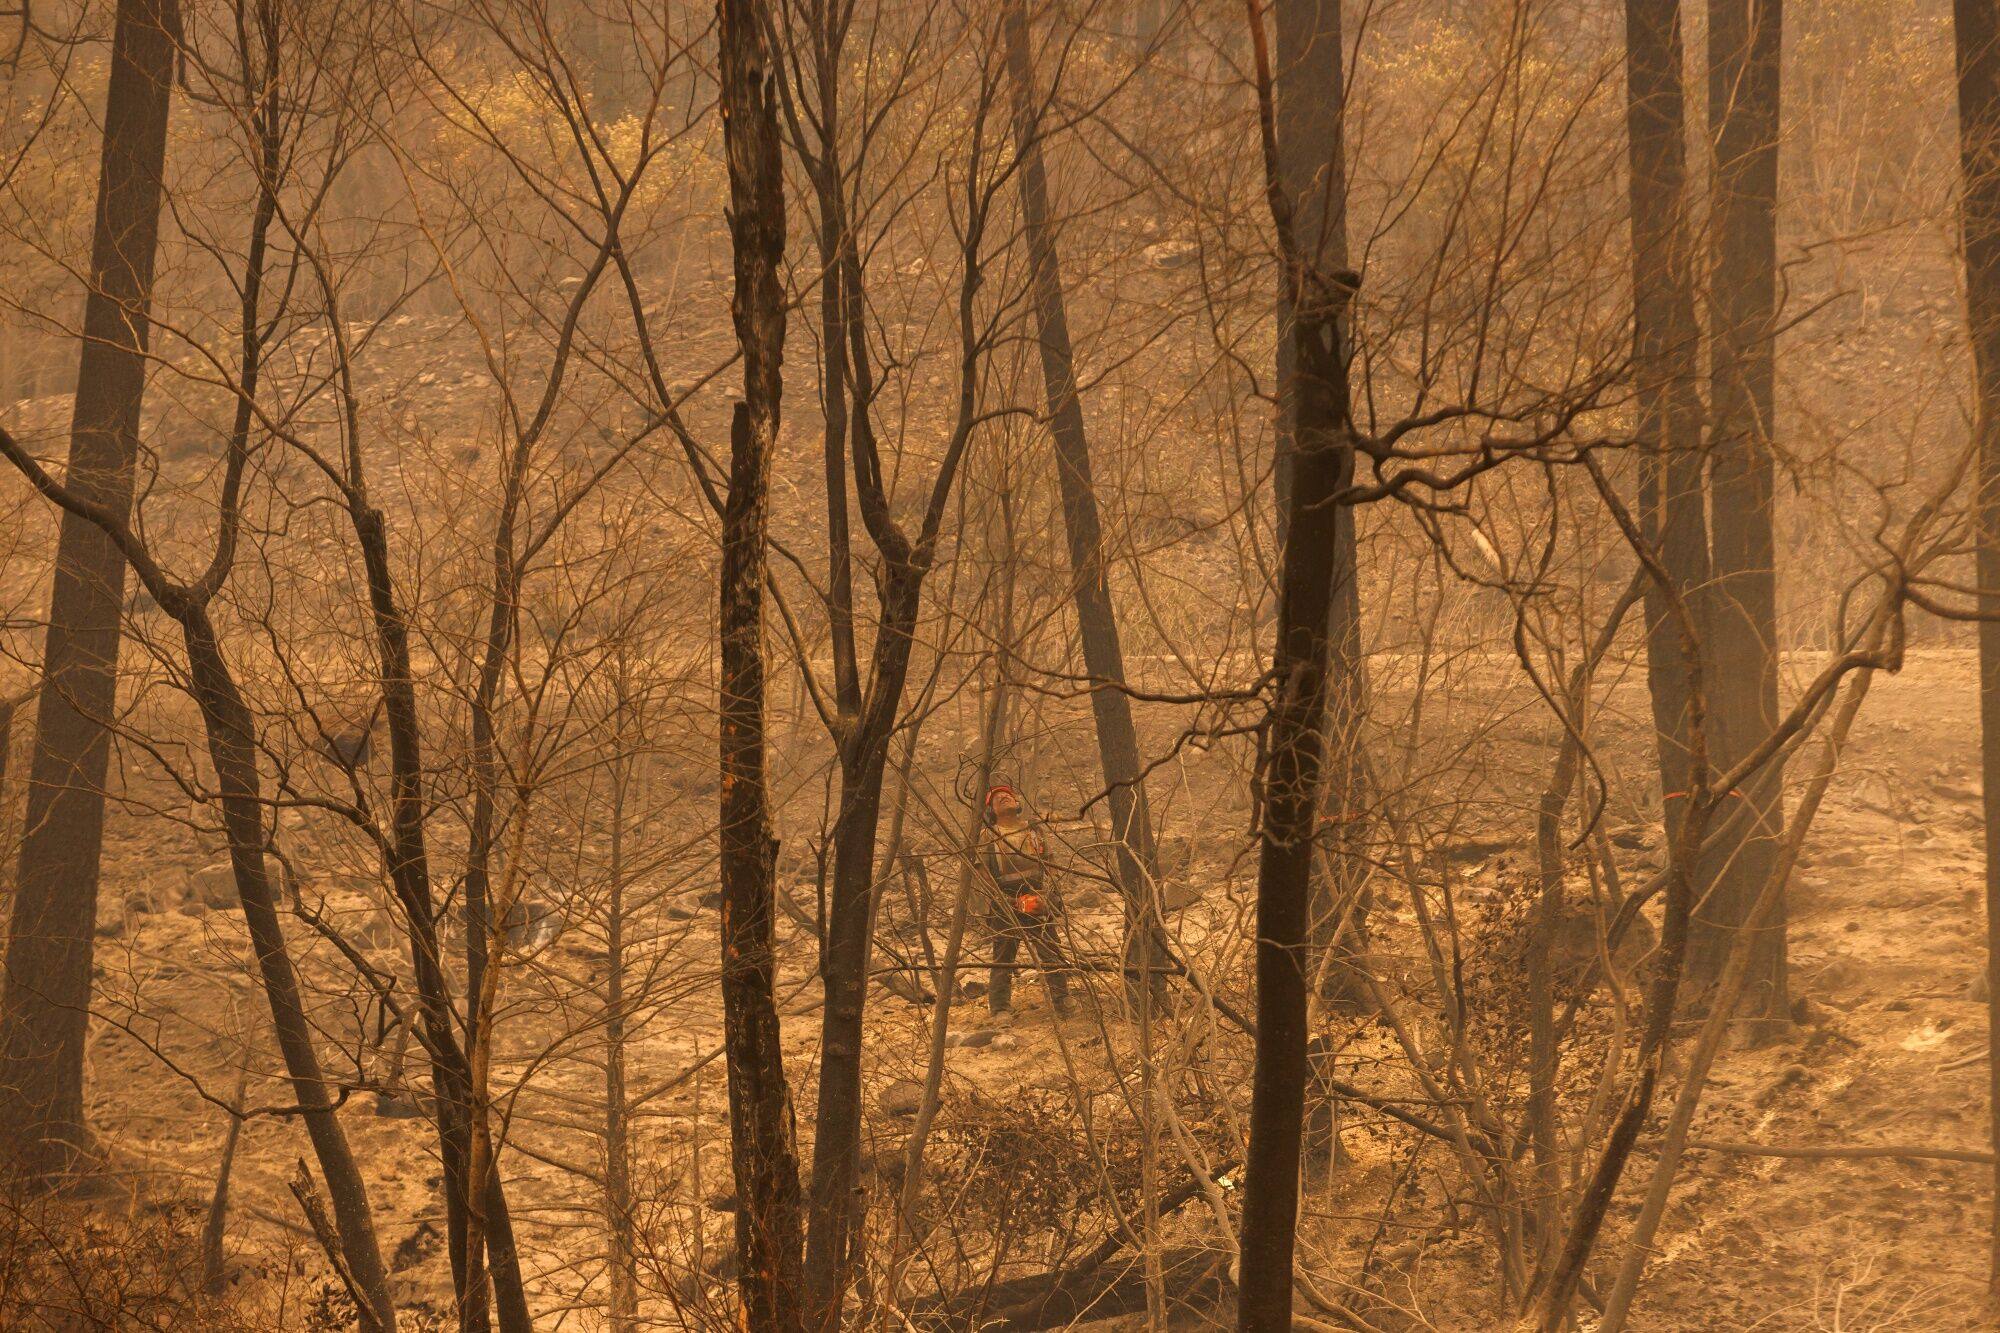 A worker is seen in a burned out forest in HI ne Secwepemc Kwe, British Columbia, Canada on Sunday. Photo: Bloomberg